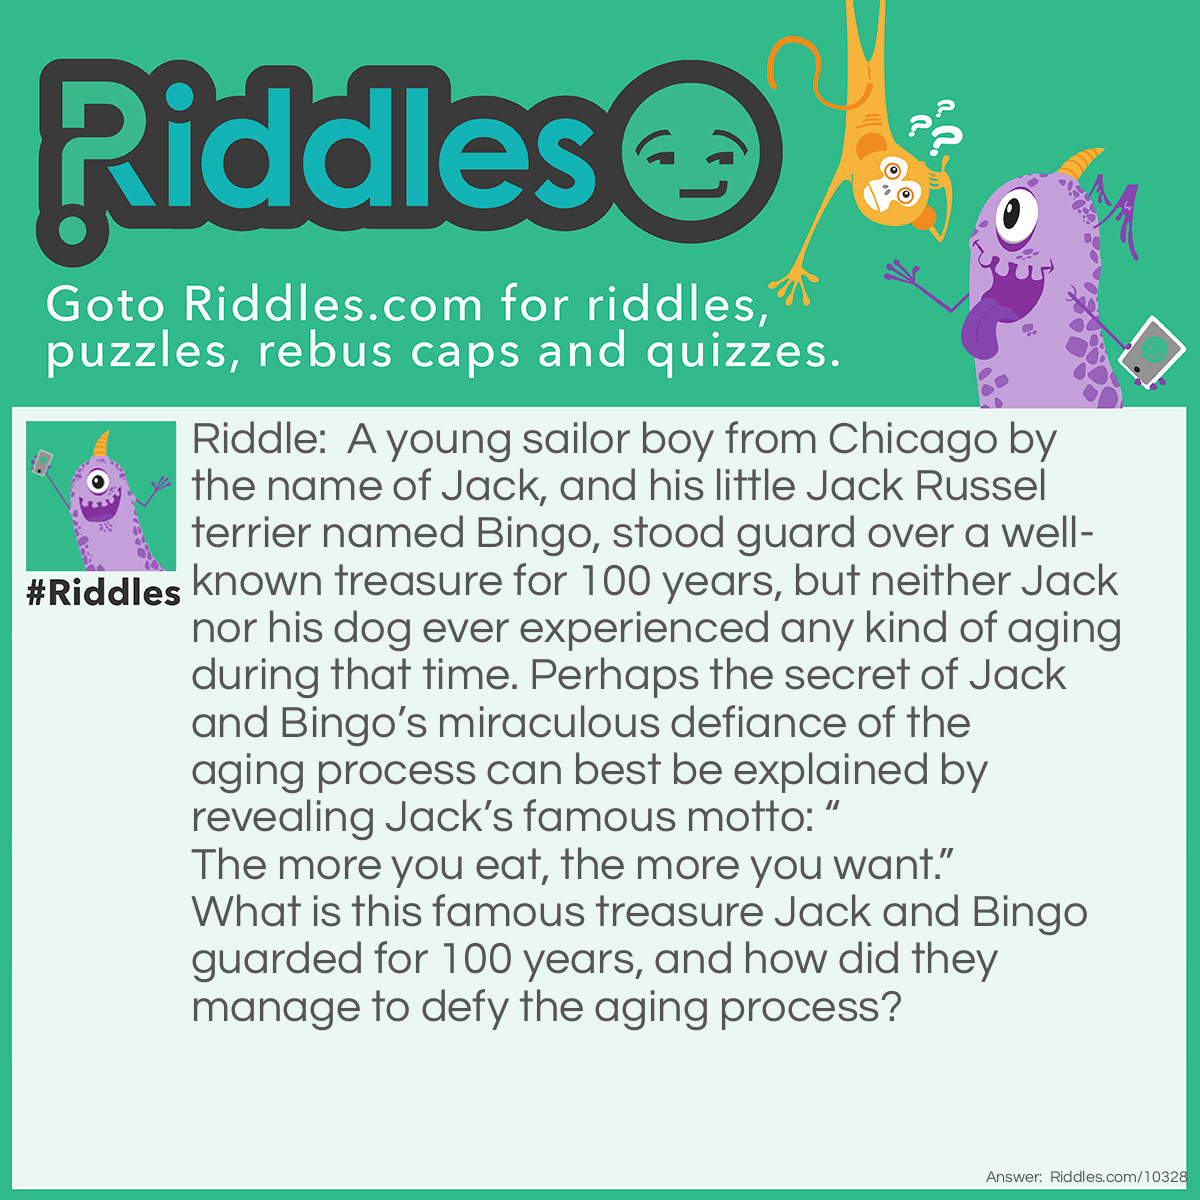 Riddle: A young sailor boy from Chicago by the name of Jack, and his little Jack Russel terrier named Bingo, stood guard over a well-known treasure for 100 years, but neither Jack nor his dog ever experienced any kind of aging during that time. Perhaps the secret of Jack and Bingo's miraculous defiance of the aging process can best be explained by revealing Jack's famous motto: "The more you eat, the more you want." What is this famous treasure Jack and Bingo guarded for 100 years, and how did they manage to defy the aging process? Answer: Young Sailor Jack and his little Jack Russel terrier have adorned every box of Cracker Jack that contained a hidden treasure (a prize) from 1916 until 2016. The company stopped putting little material prizes in each box in 2016, much to the chagrin of baseball fans everywhere.